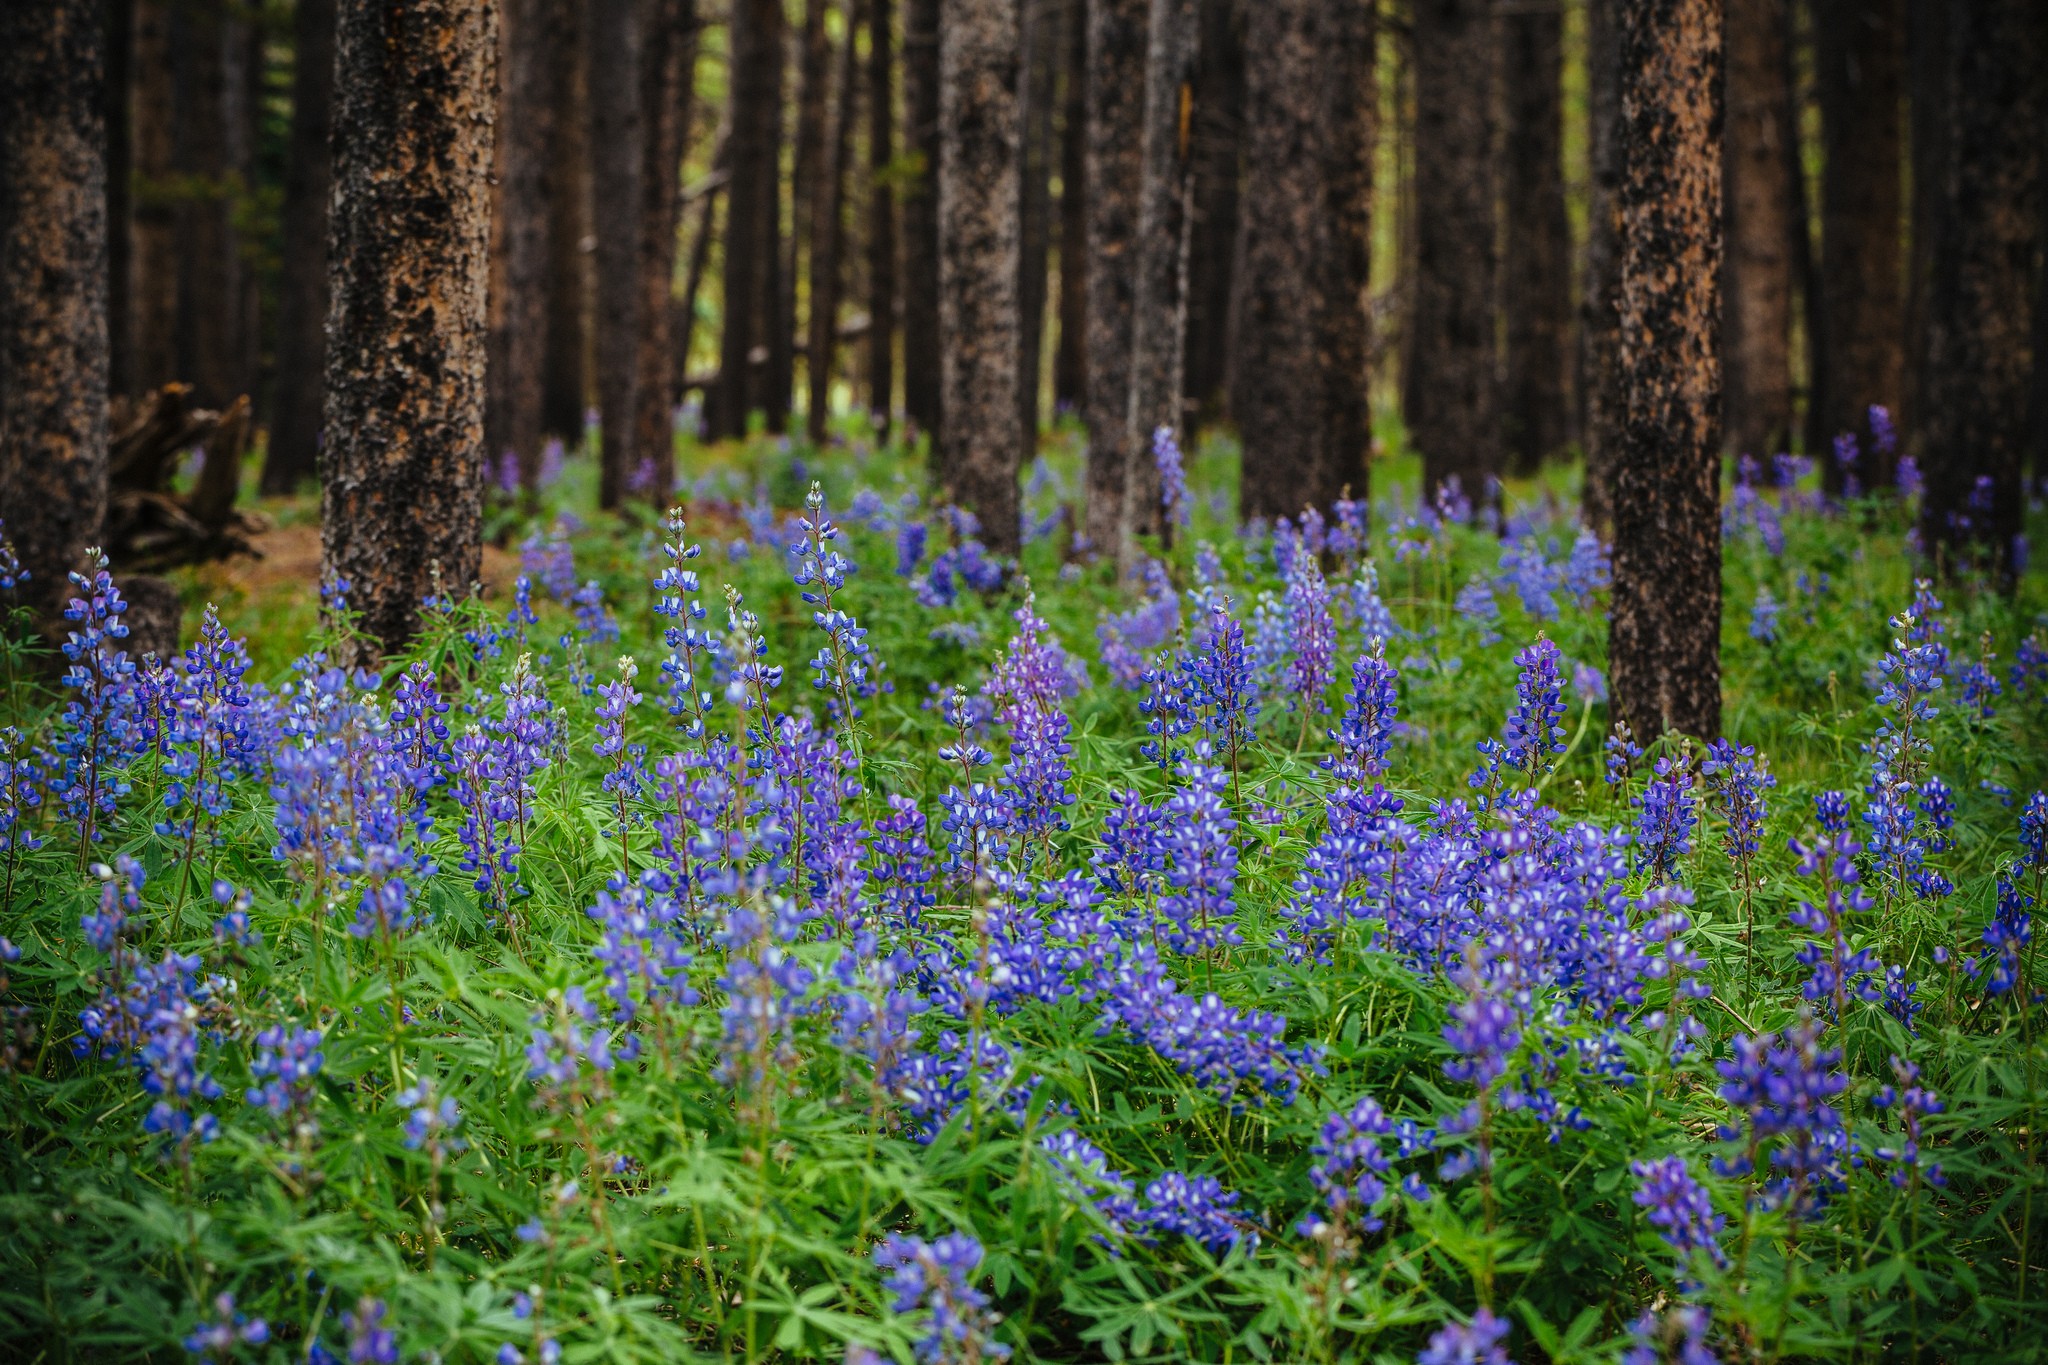 General 2048x1365 flowers plants purple flowers forest trees nature